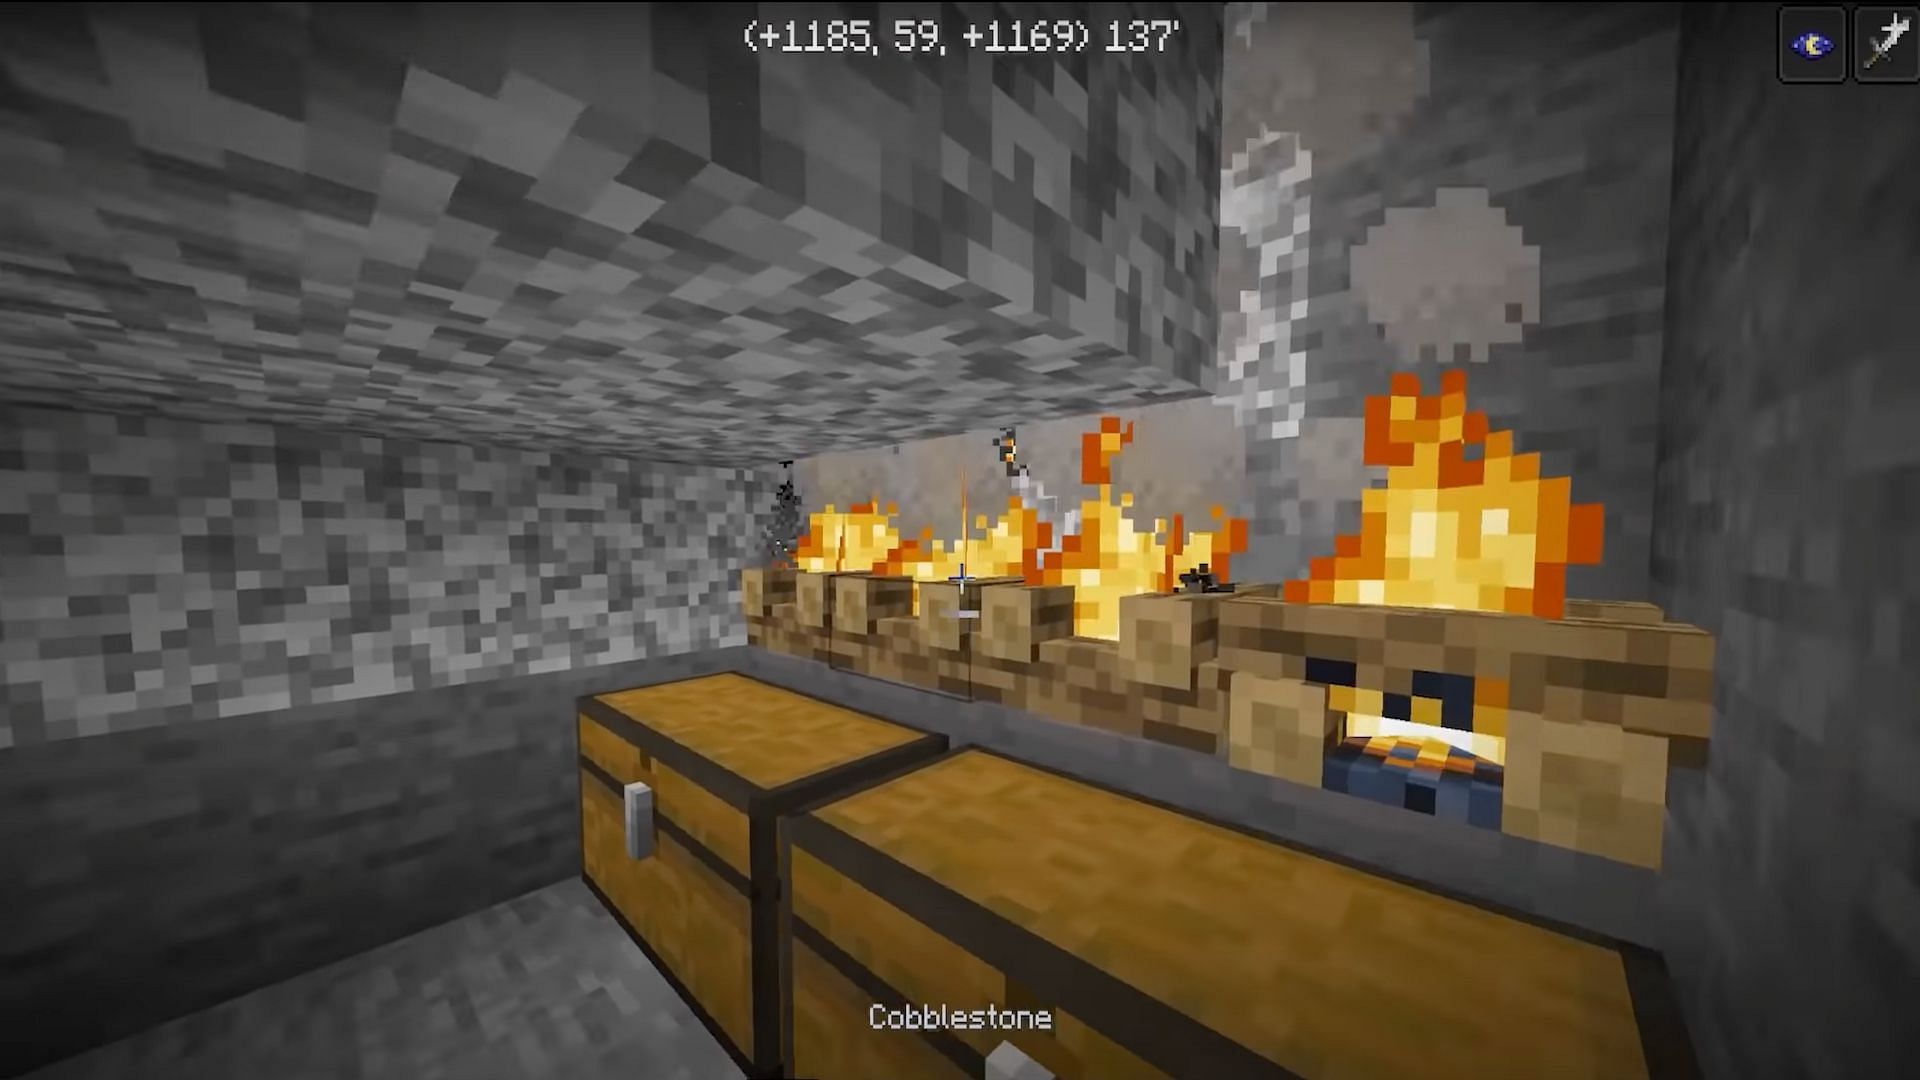 Players must add chests, hoppers, and campfires to the collection room (Image via Dusty Dude/YouTube)